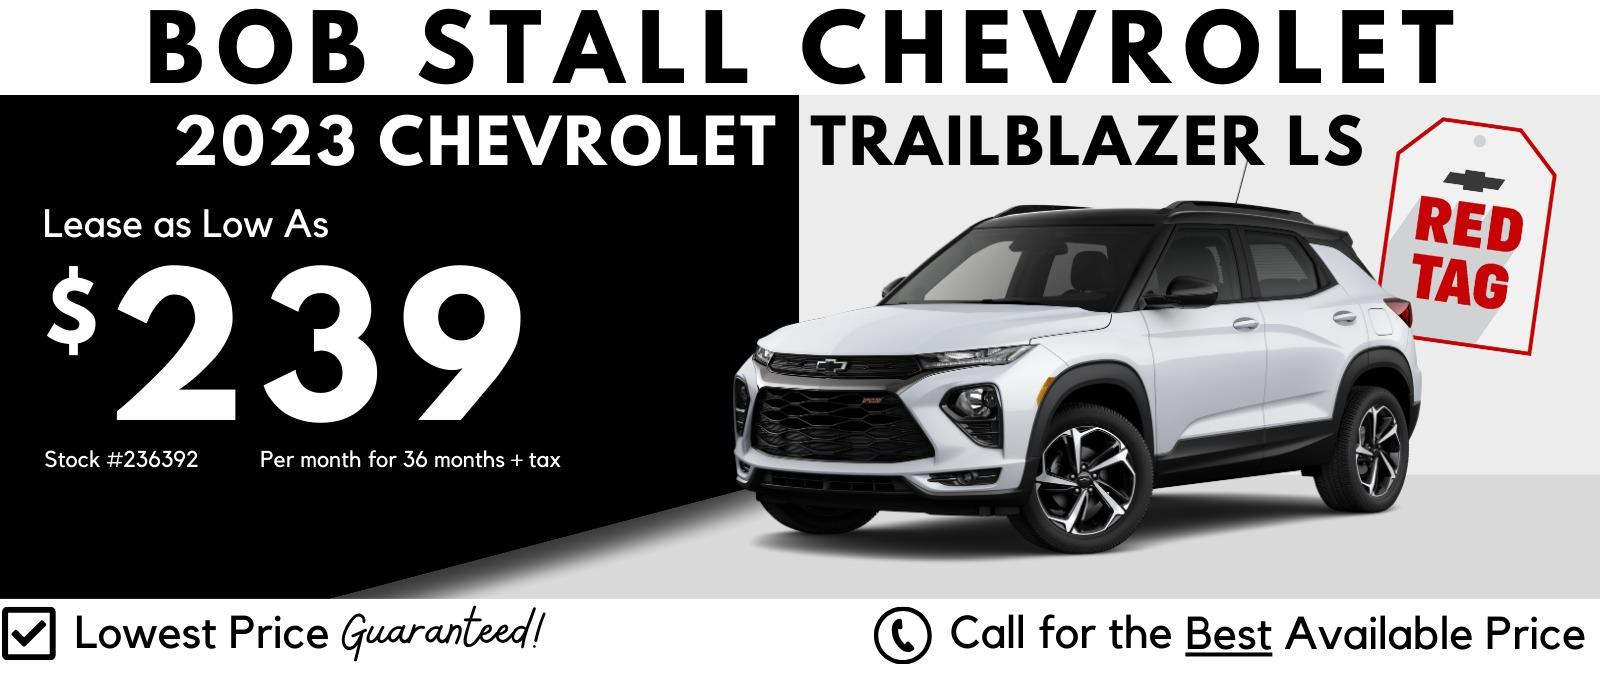 Trailblazer 2023 Savings - Lease as low as $239 per month for 36 Months